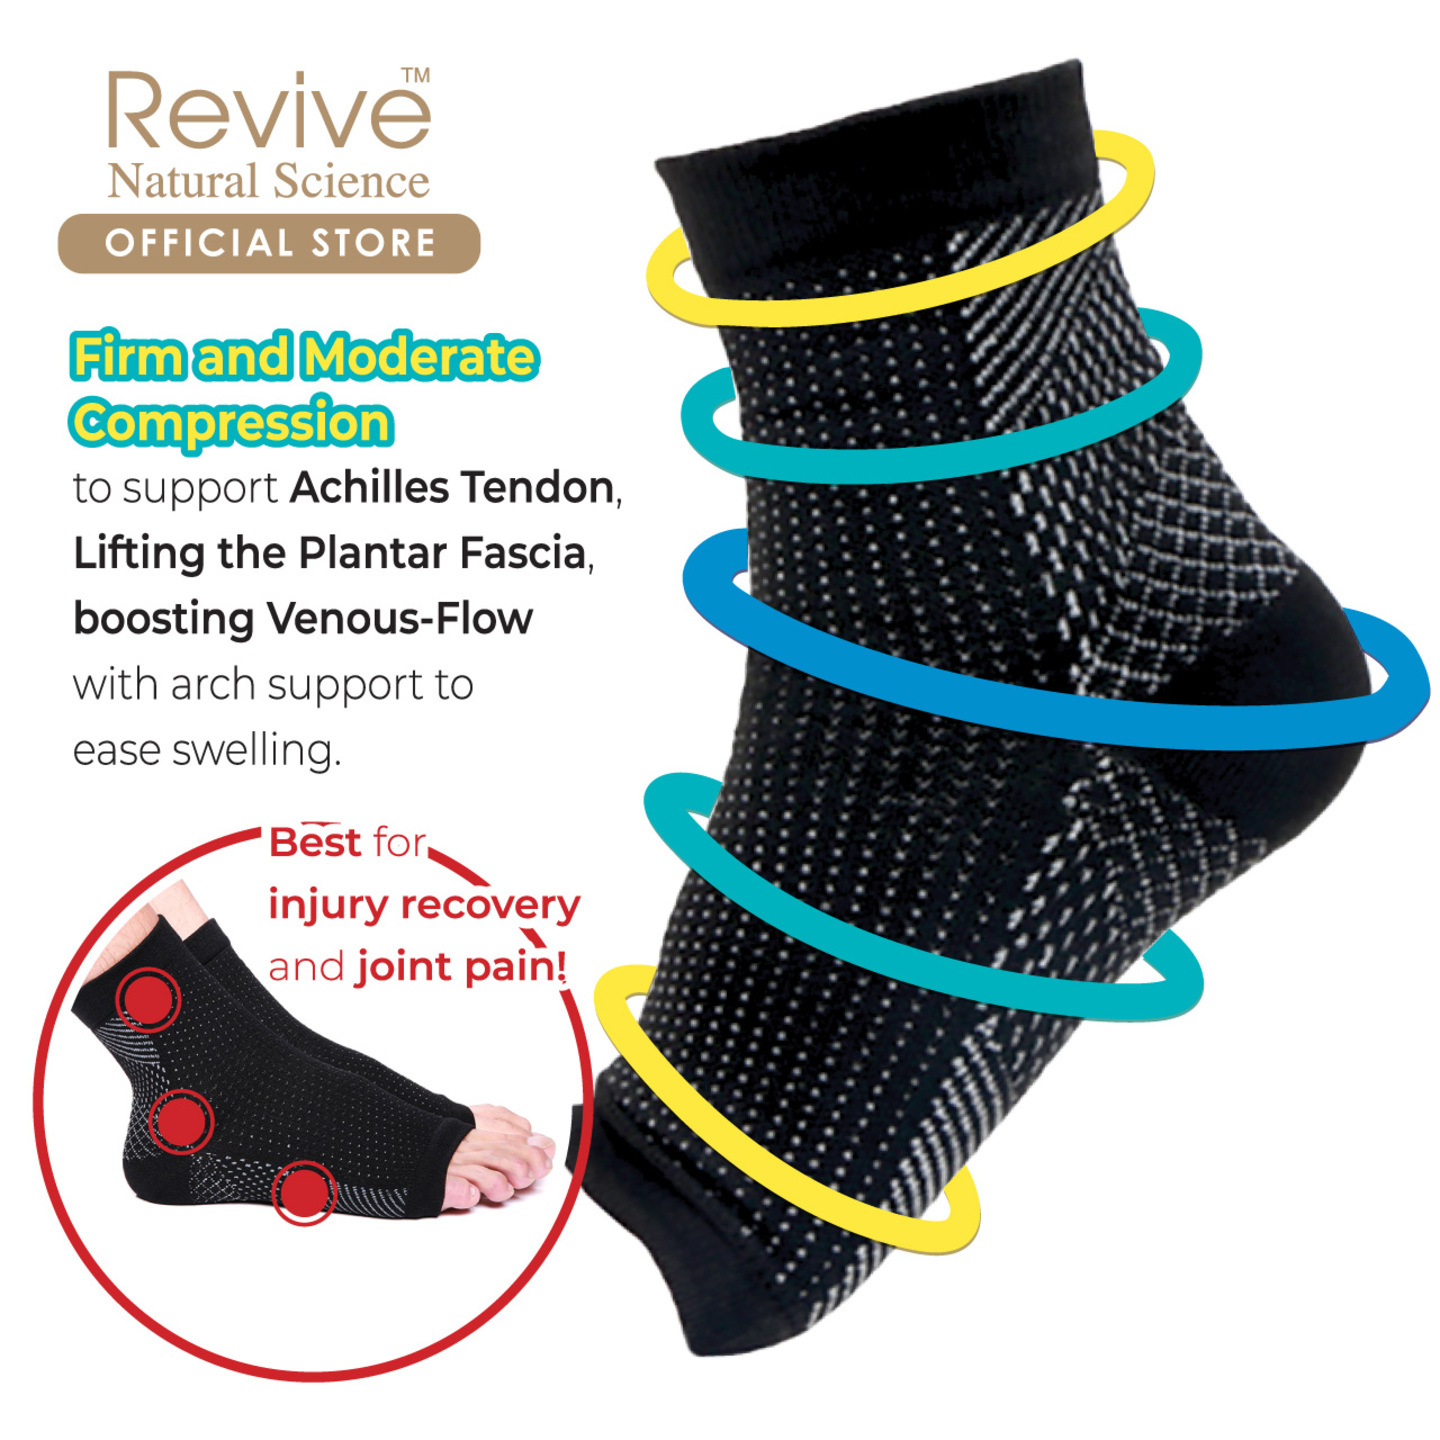 RV 13-Compression Foot Sleeve Ankle Support Brace